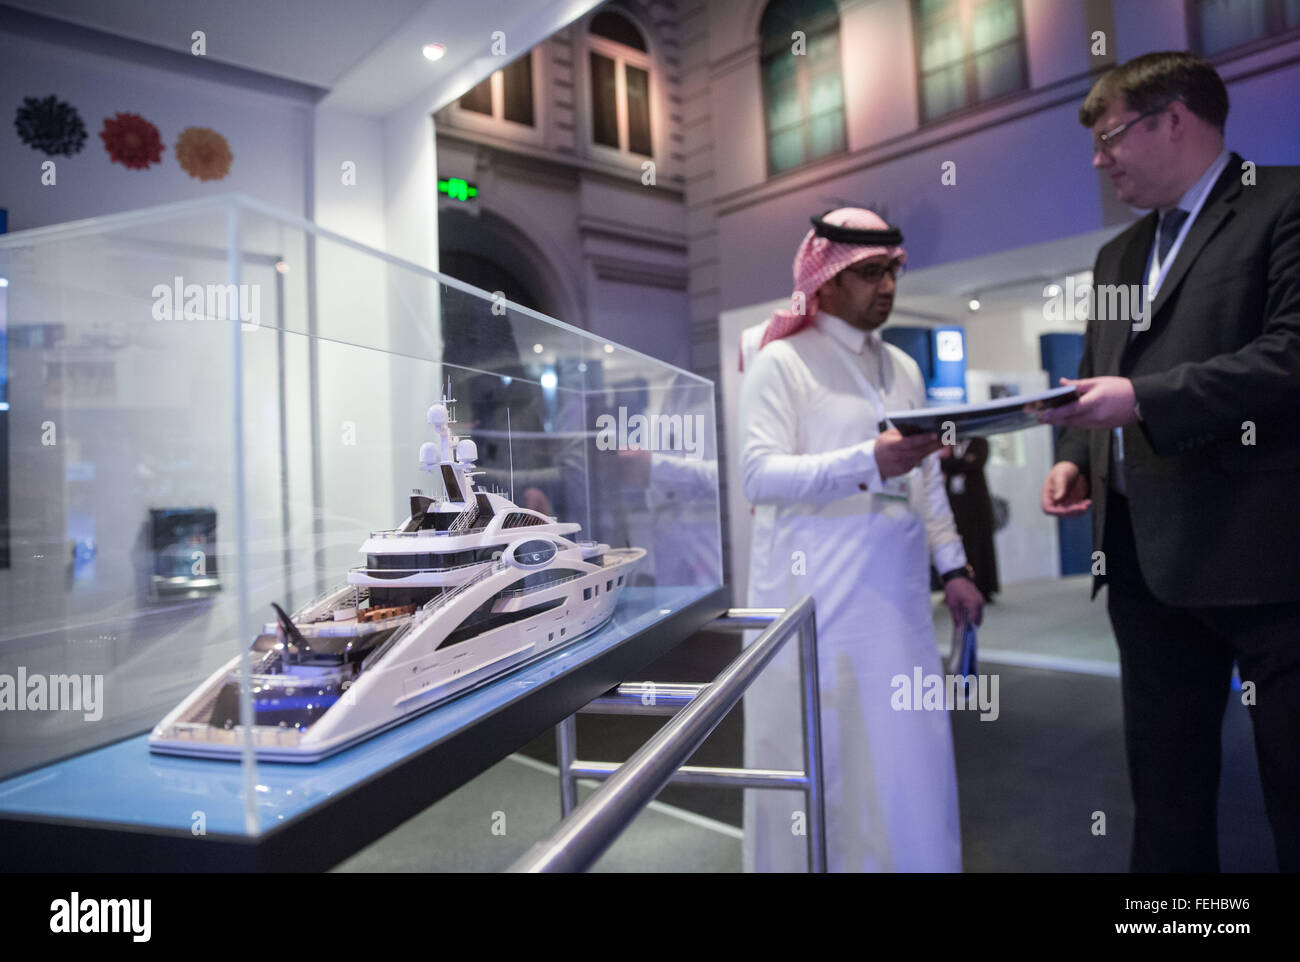 Riad, Saudi Arabia. 03rd Feb, 2016. A man takes a leaflet at the booth of the Luerssen shipyard in the German pavilion at the Al-Jenadriyah festival in Riad, Saudi Arabia, 03 February 2016. Germany is a guest country at the two-week cultural and heritage festival in Jenadriyah near Riad. Photo: MICHAEL KAPPELER/dpa/Alamy Live News Stock Photo